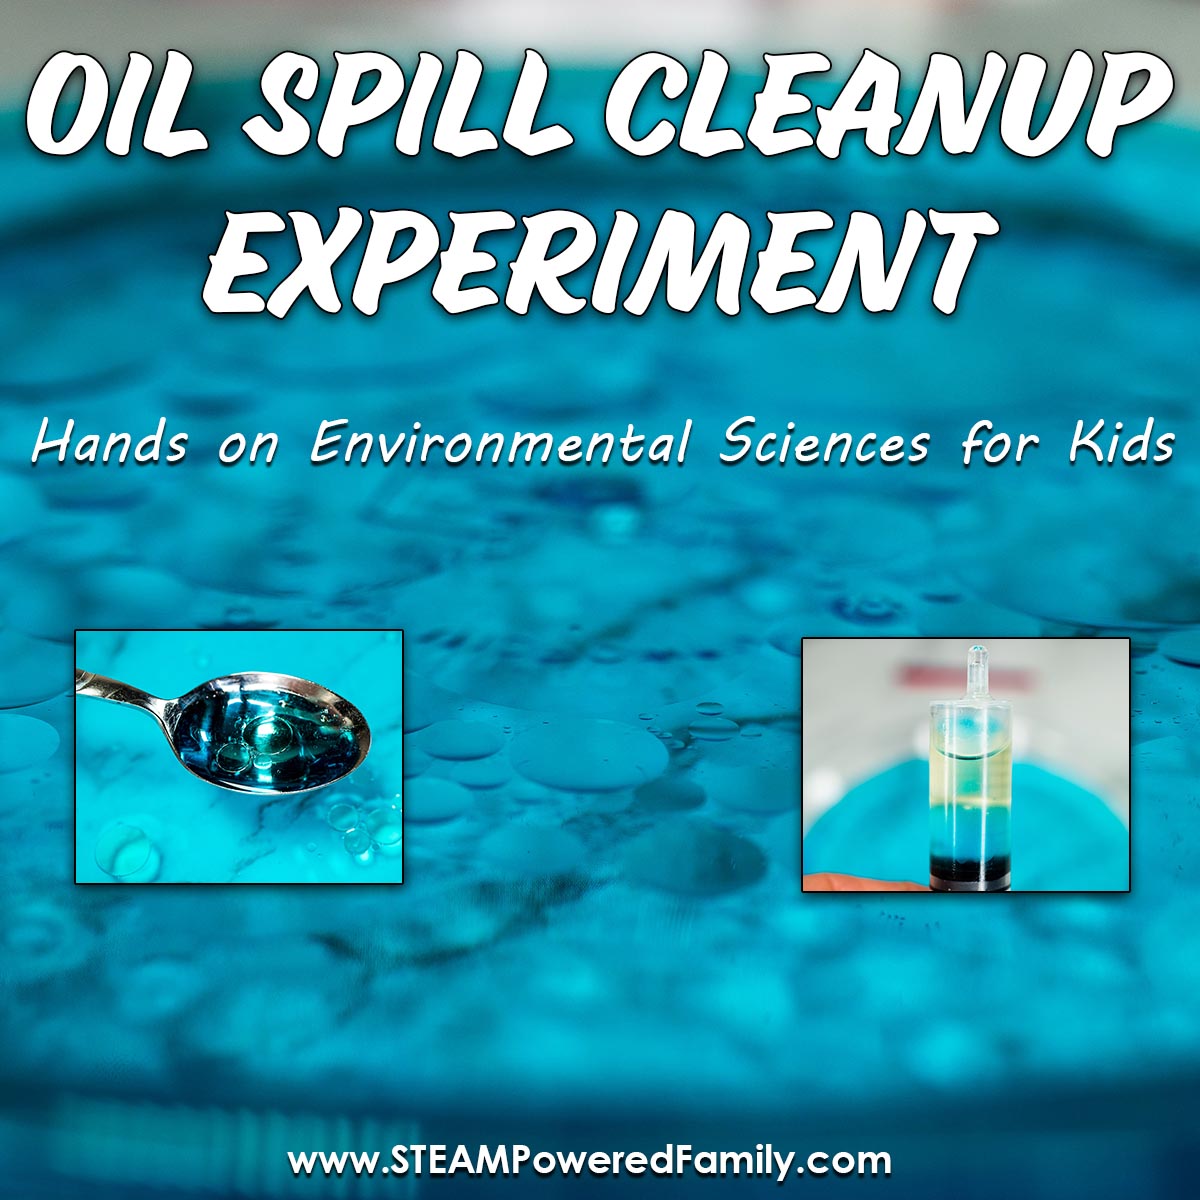 Oil Spill Cleanup Experiment